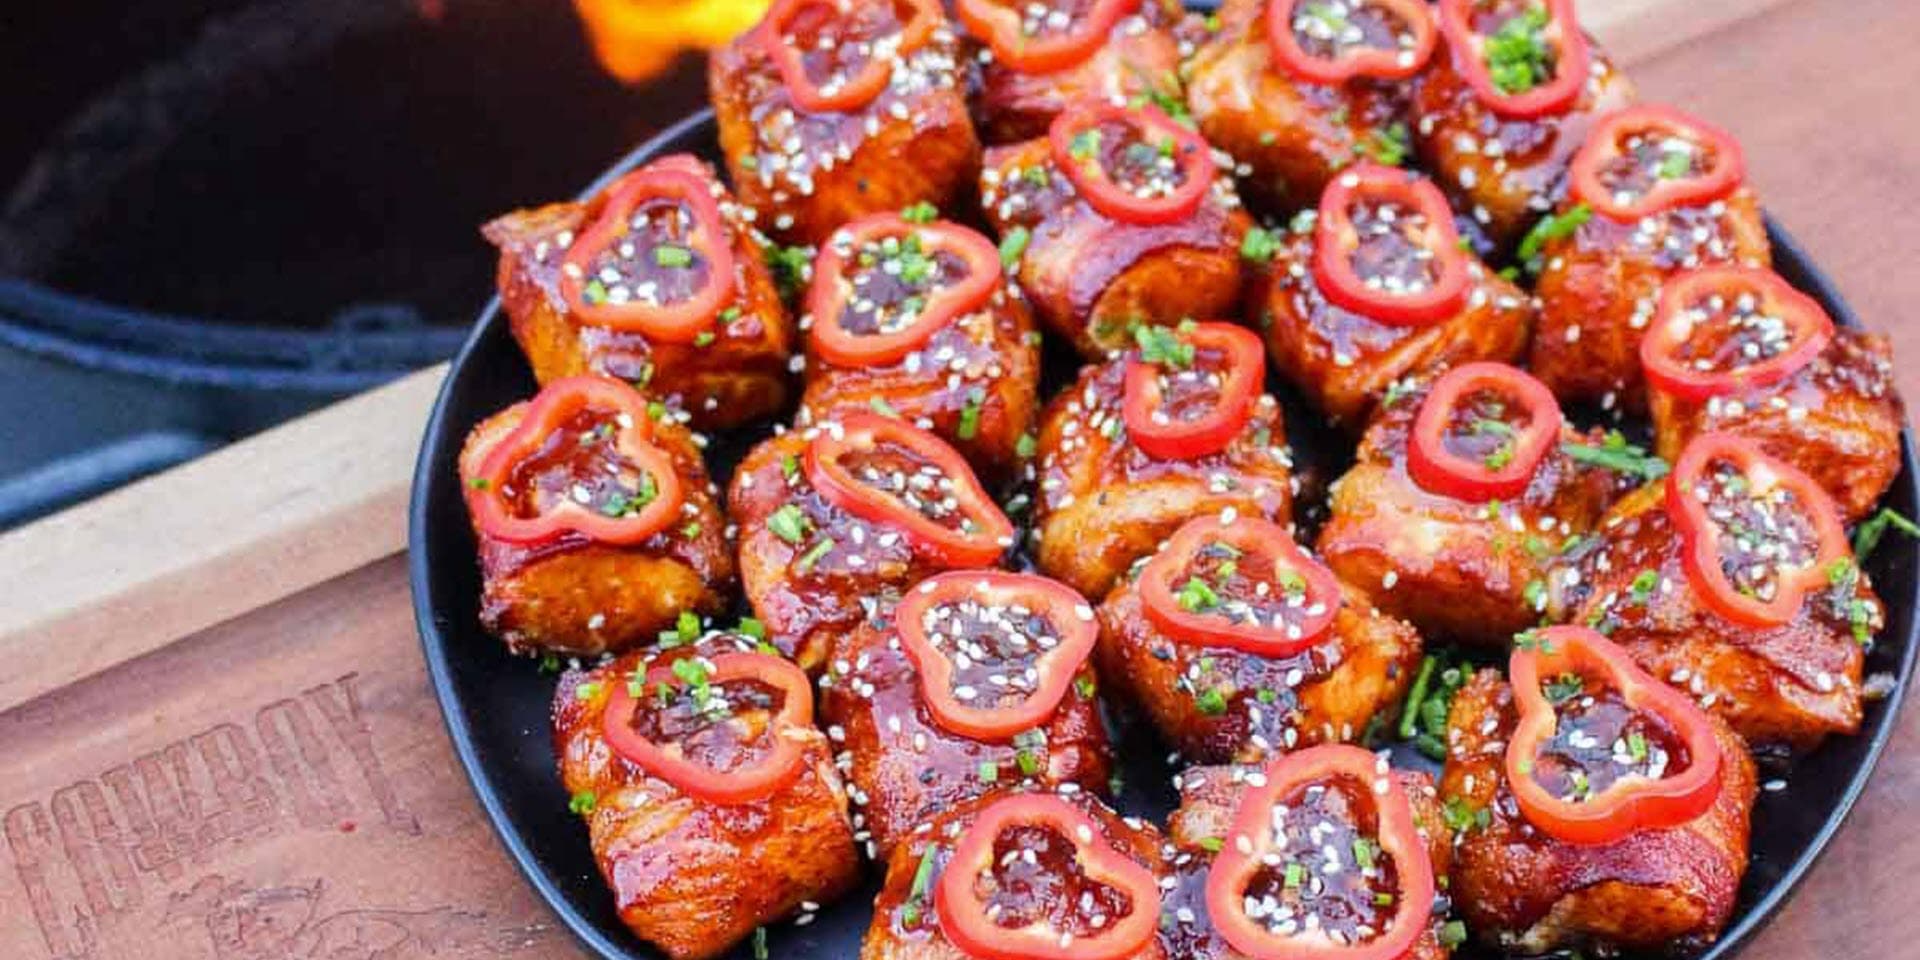 Bacon-wrapped salmon bites garnished with peppers